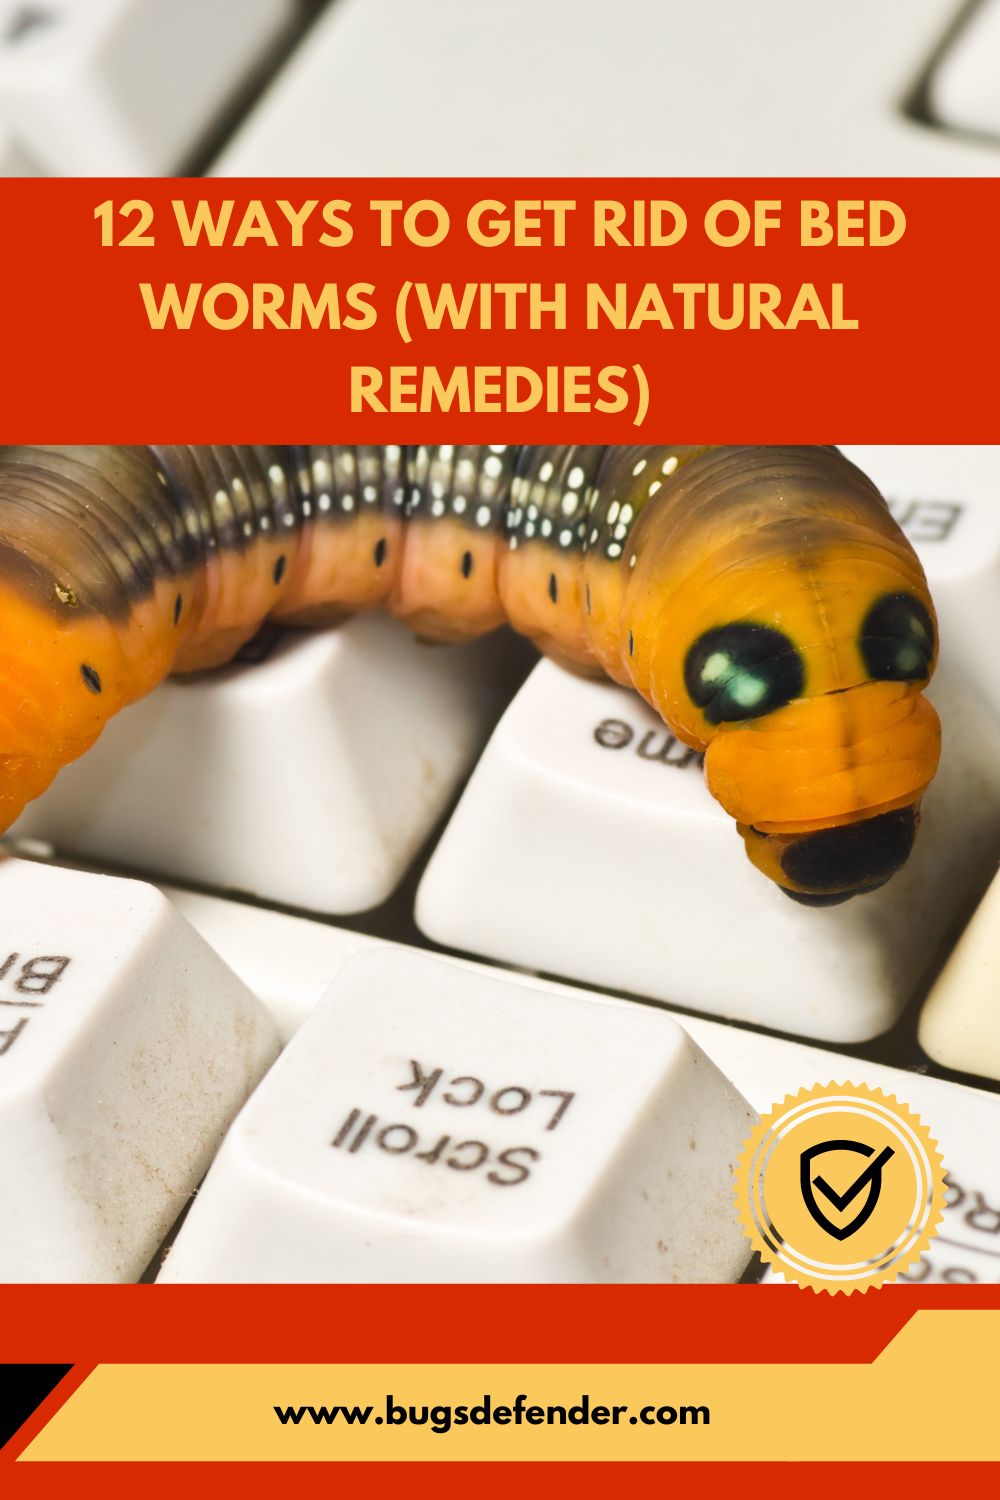 12 Ways to Get Rid of Bed Worms pin2